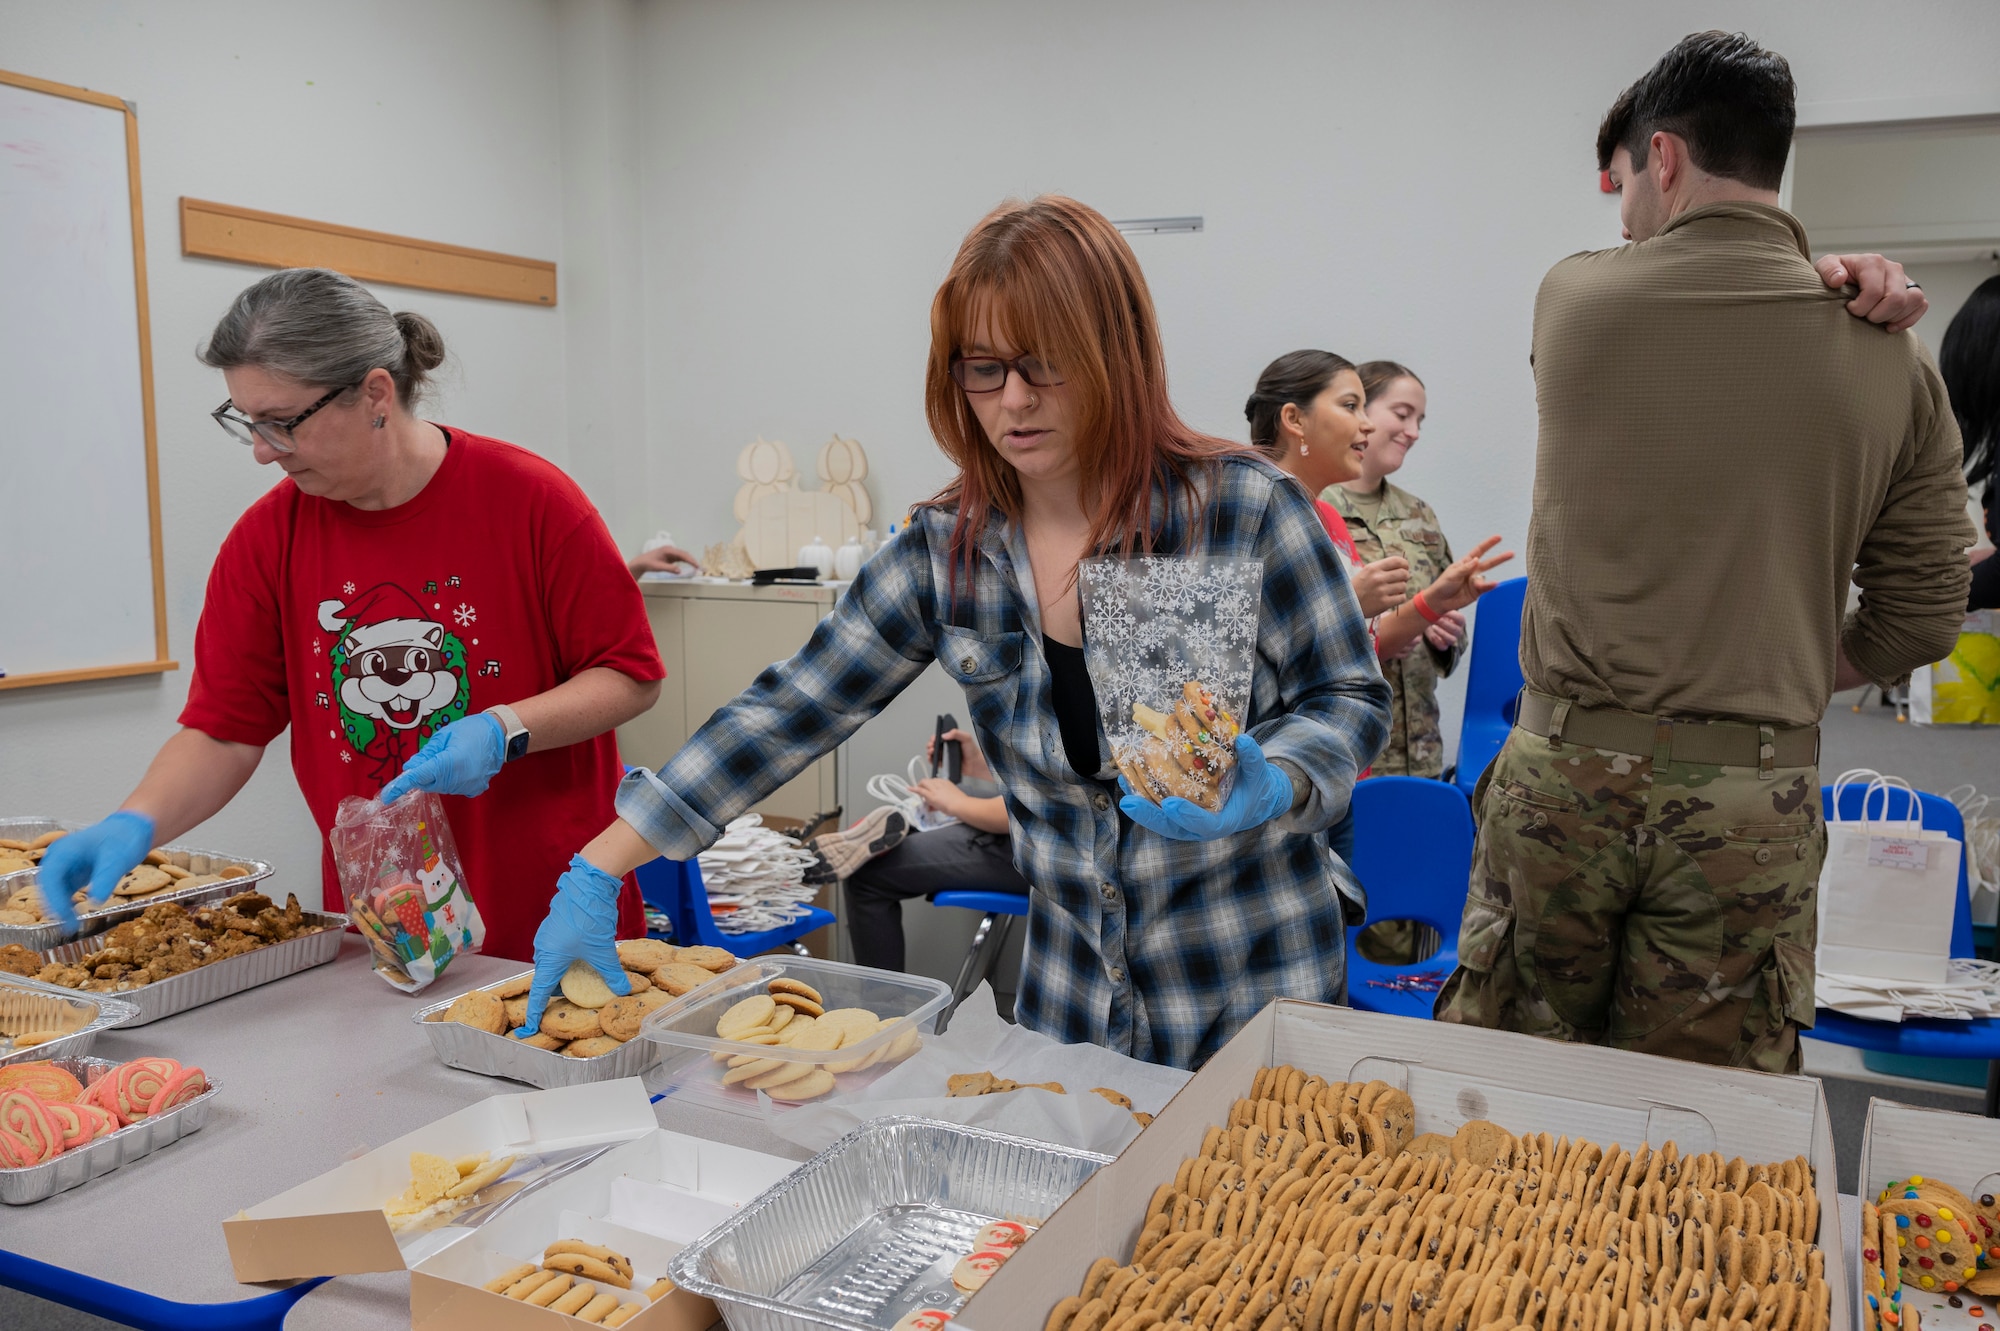 Volunteers sort cookies at Dyess Air Force Base, Texas, Dec. 18, 2023. Cookies were sorted into boxes to support Operation Cookie Drop, an annual program where cookies are sorted and delivered to 725 dorm Airmen. (U.S. Air Force photo by Airman 1st Class Alondra Cristobal Hernandez)